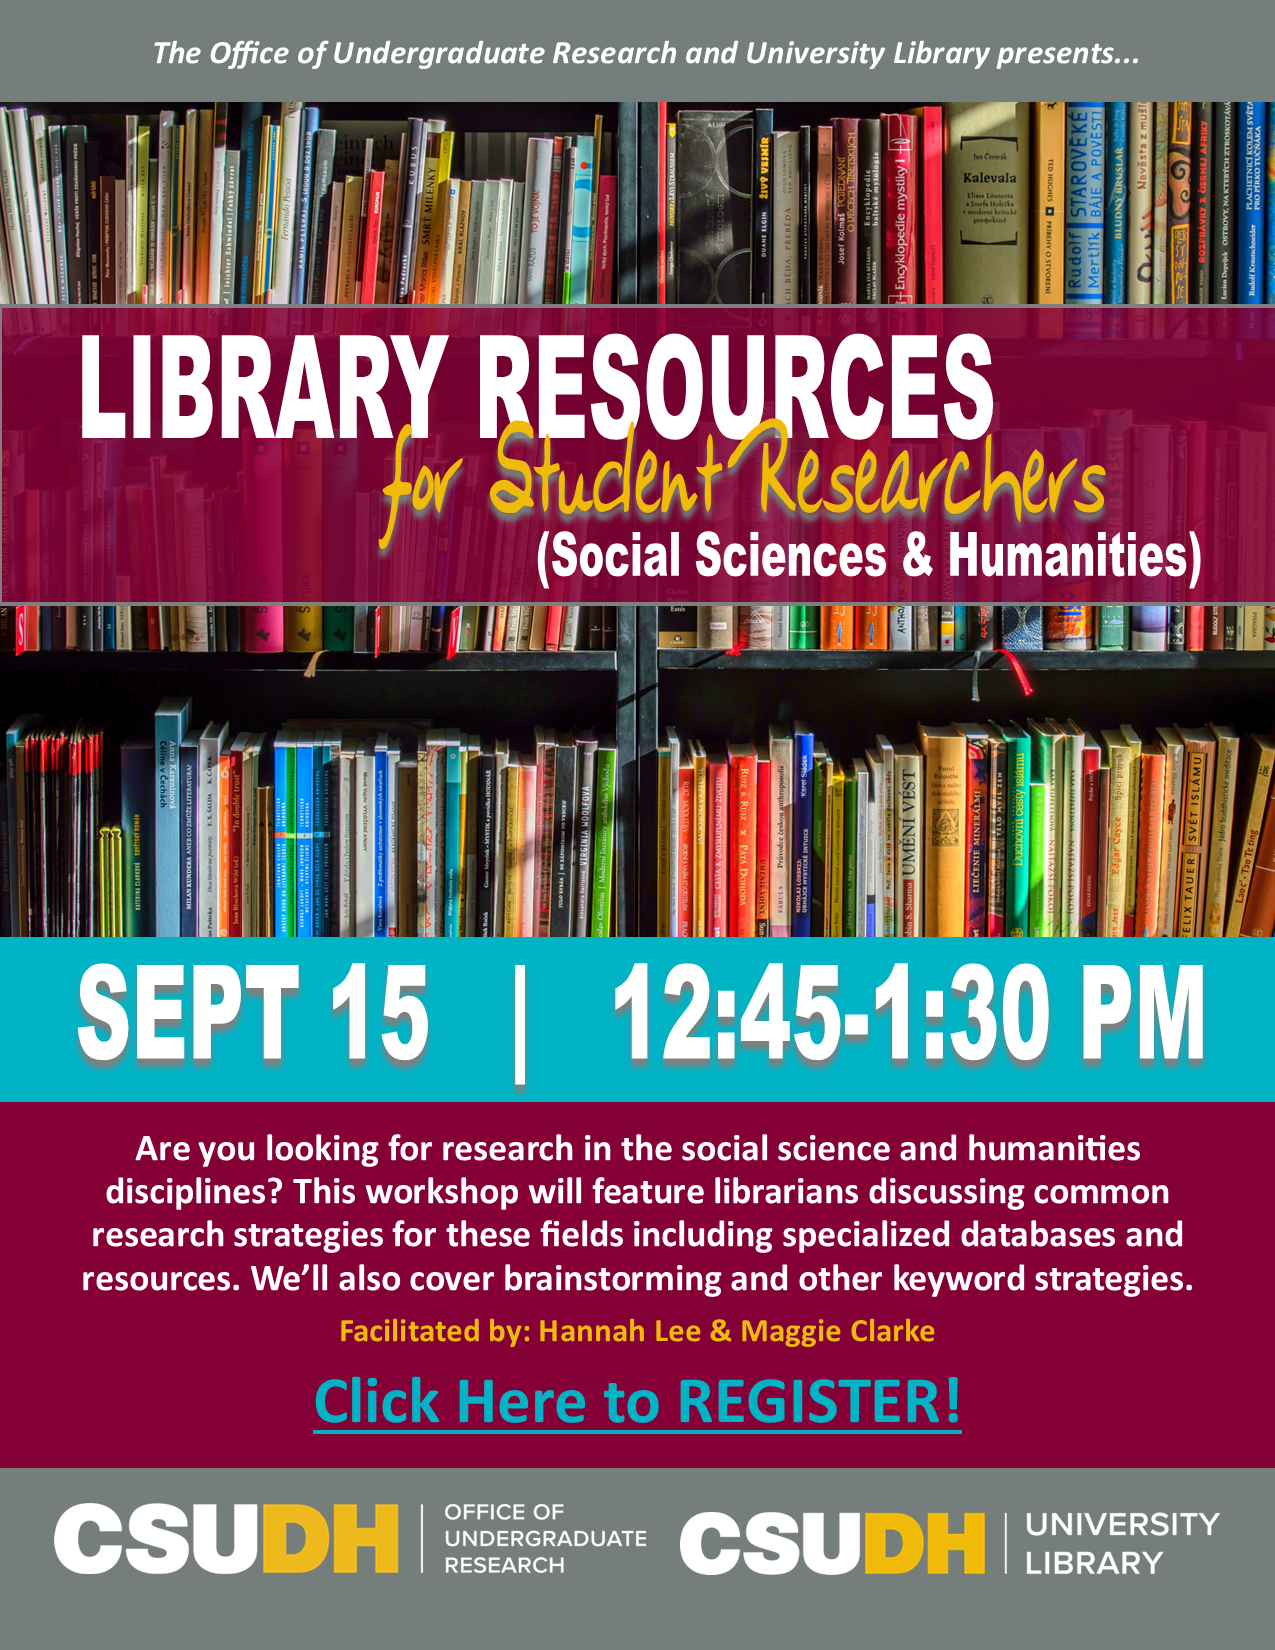 Library Resources for Student Researchers (Social Sciences & Humanities)- 9-15-21